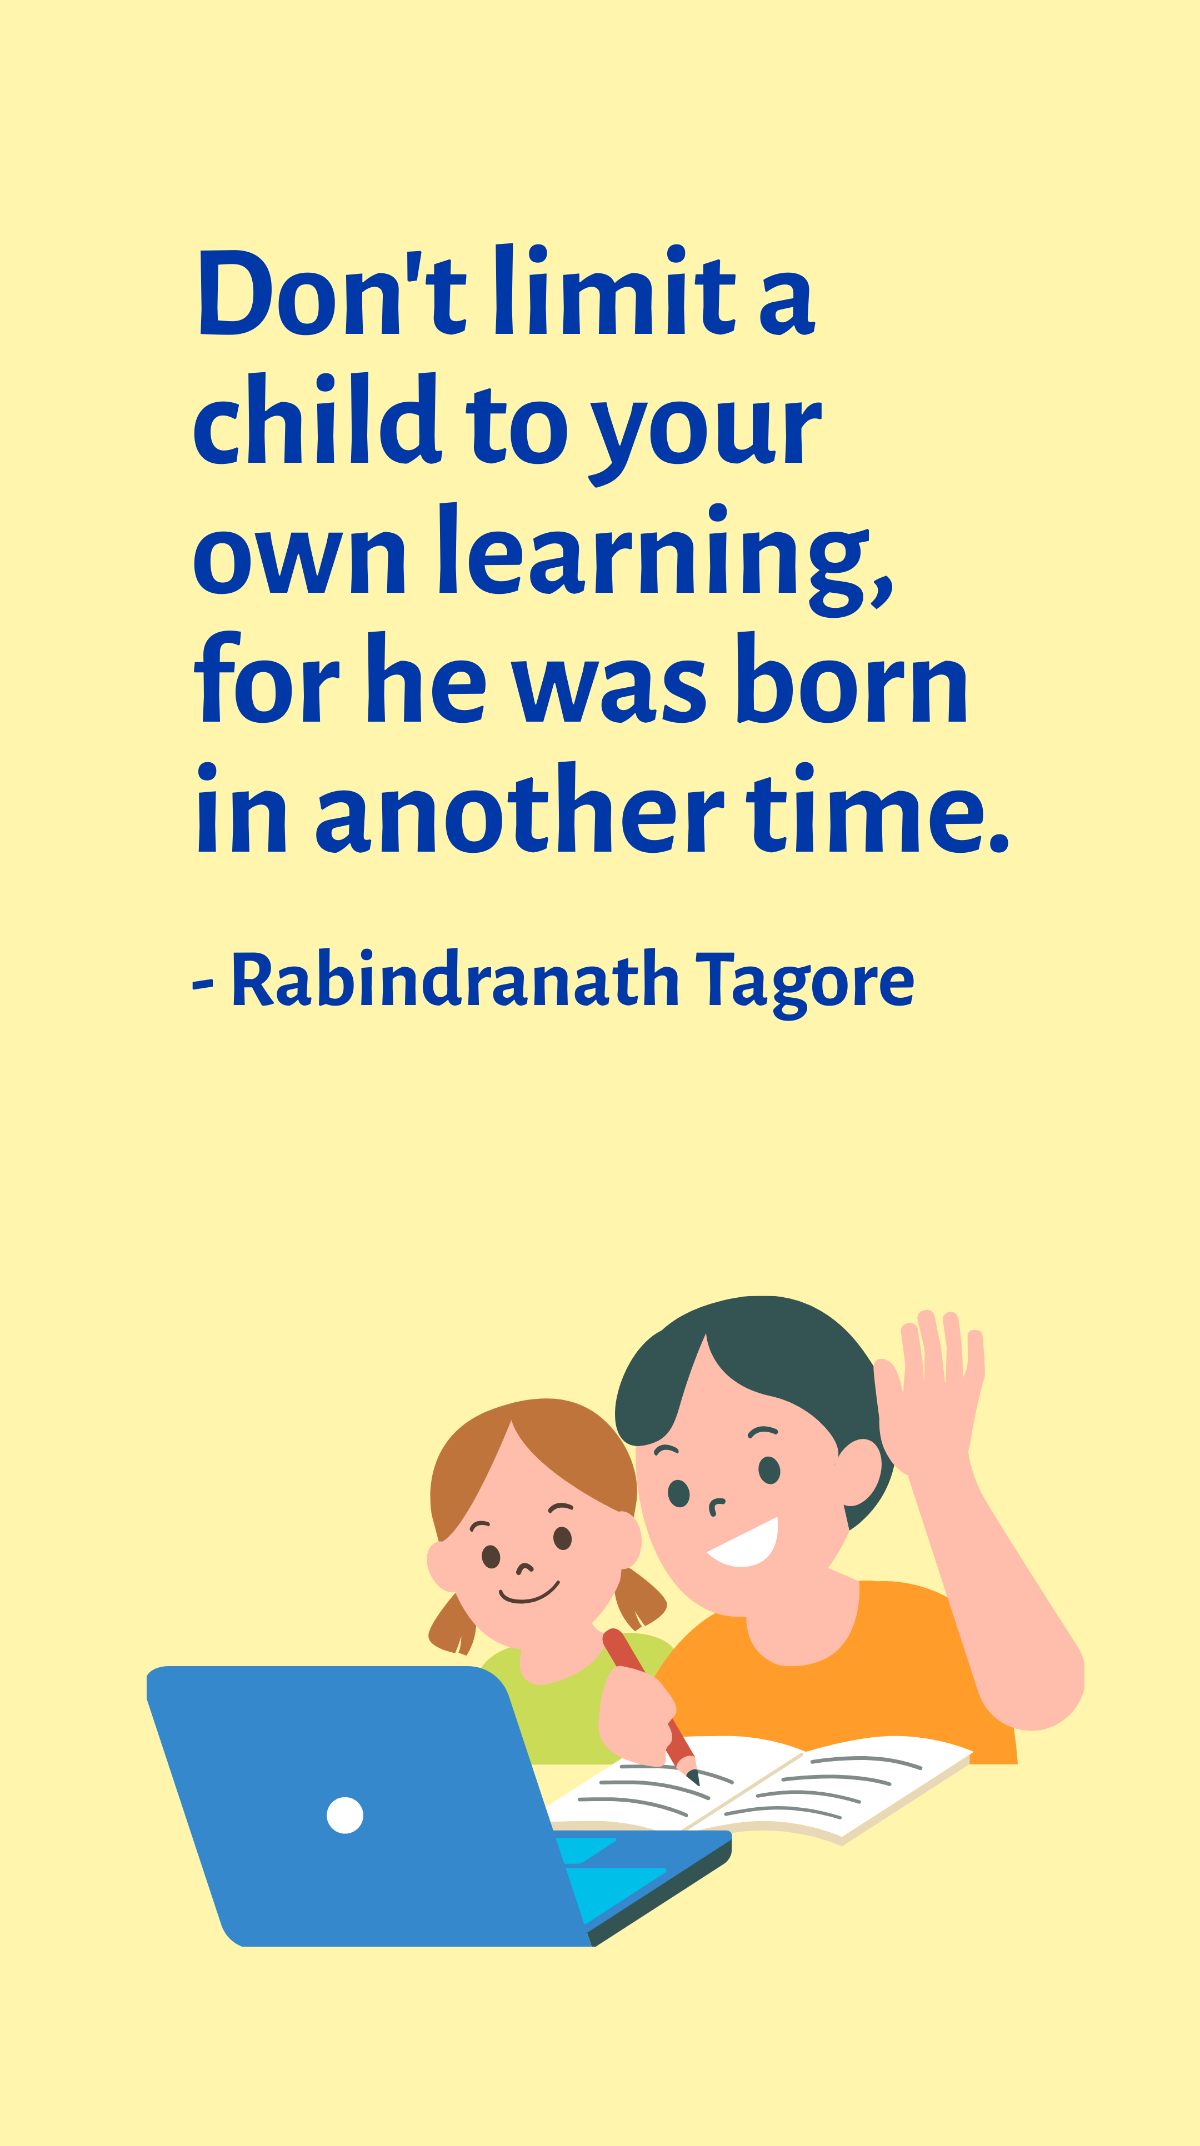 Rabindranath Tagore - Don't limit a child to your own learning, for he was born in another time. Template